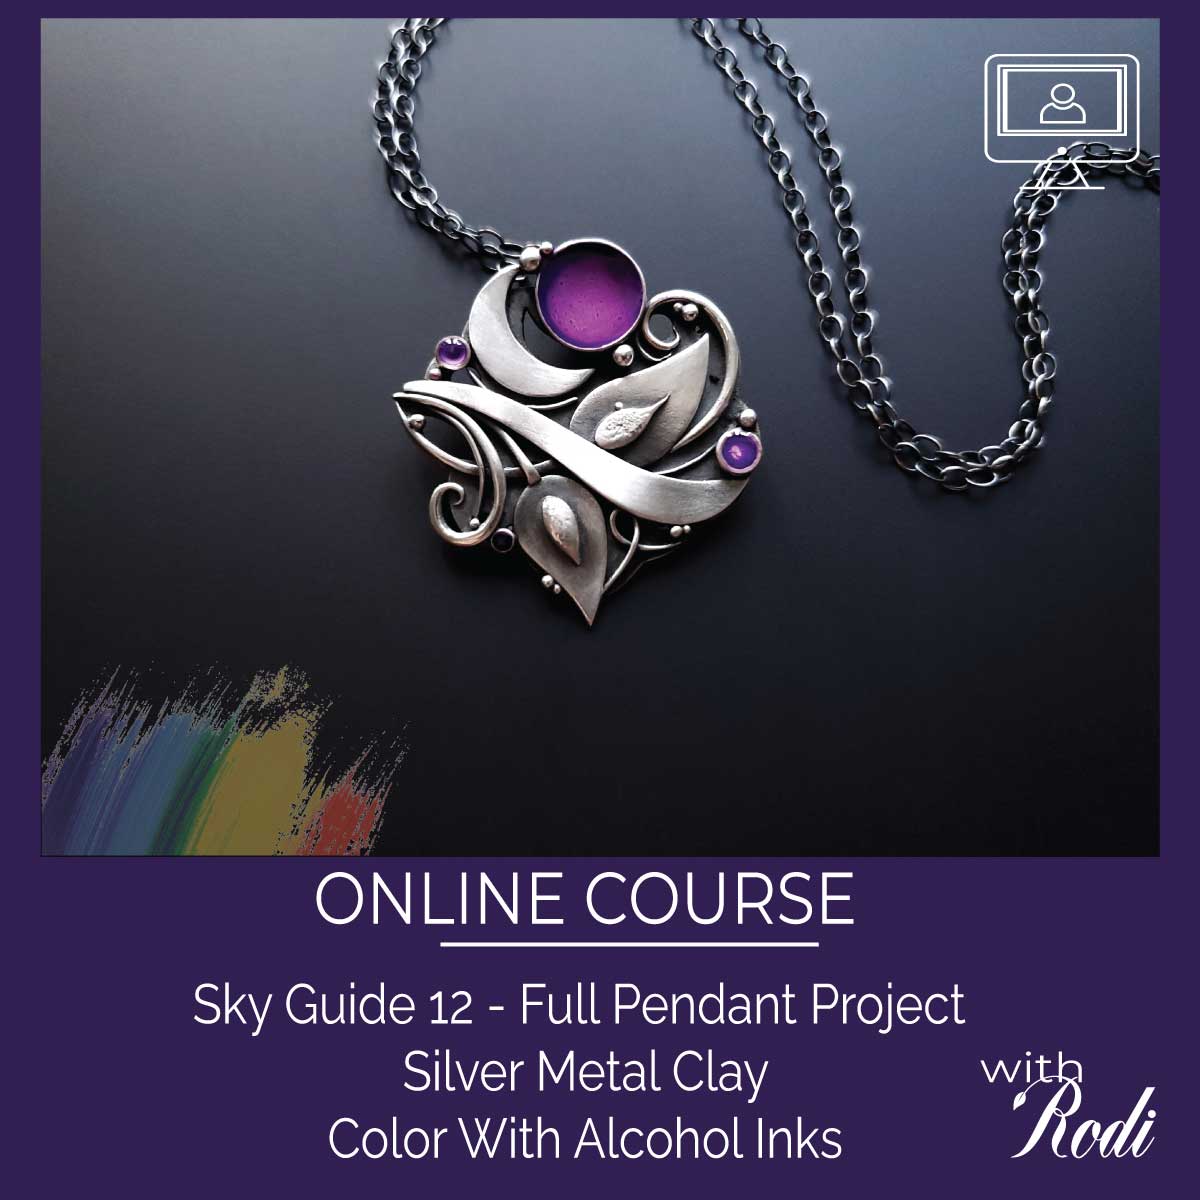 Sky Guide 9: Silver Metal Clay Metal Clay Tutorial - Hand-Forming Rose -  Metal Clay With Rodi